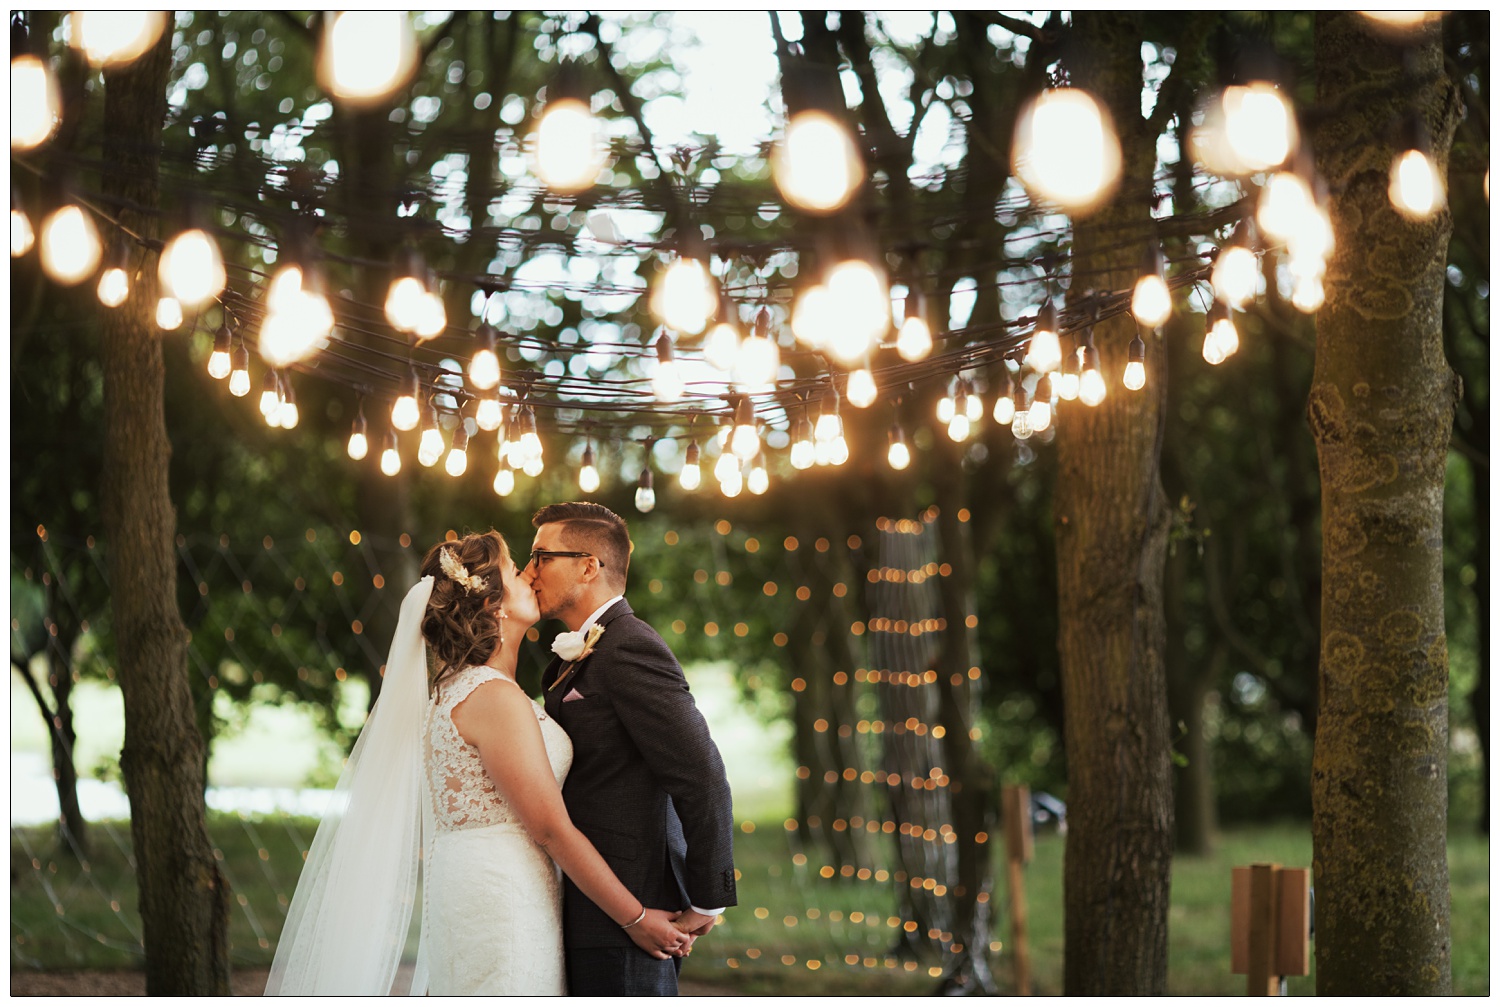 A newly married couple kiss among the trees under fairy lights. At Fynn Valley Terrace.